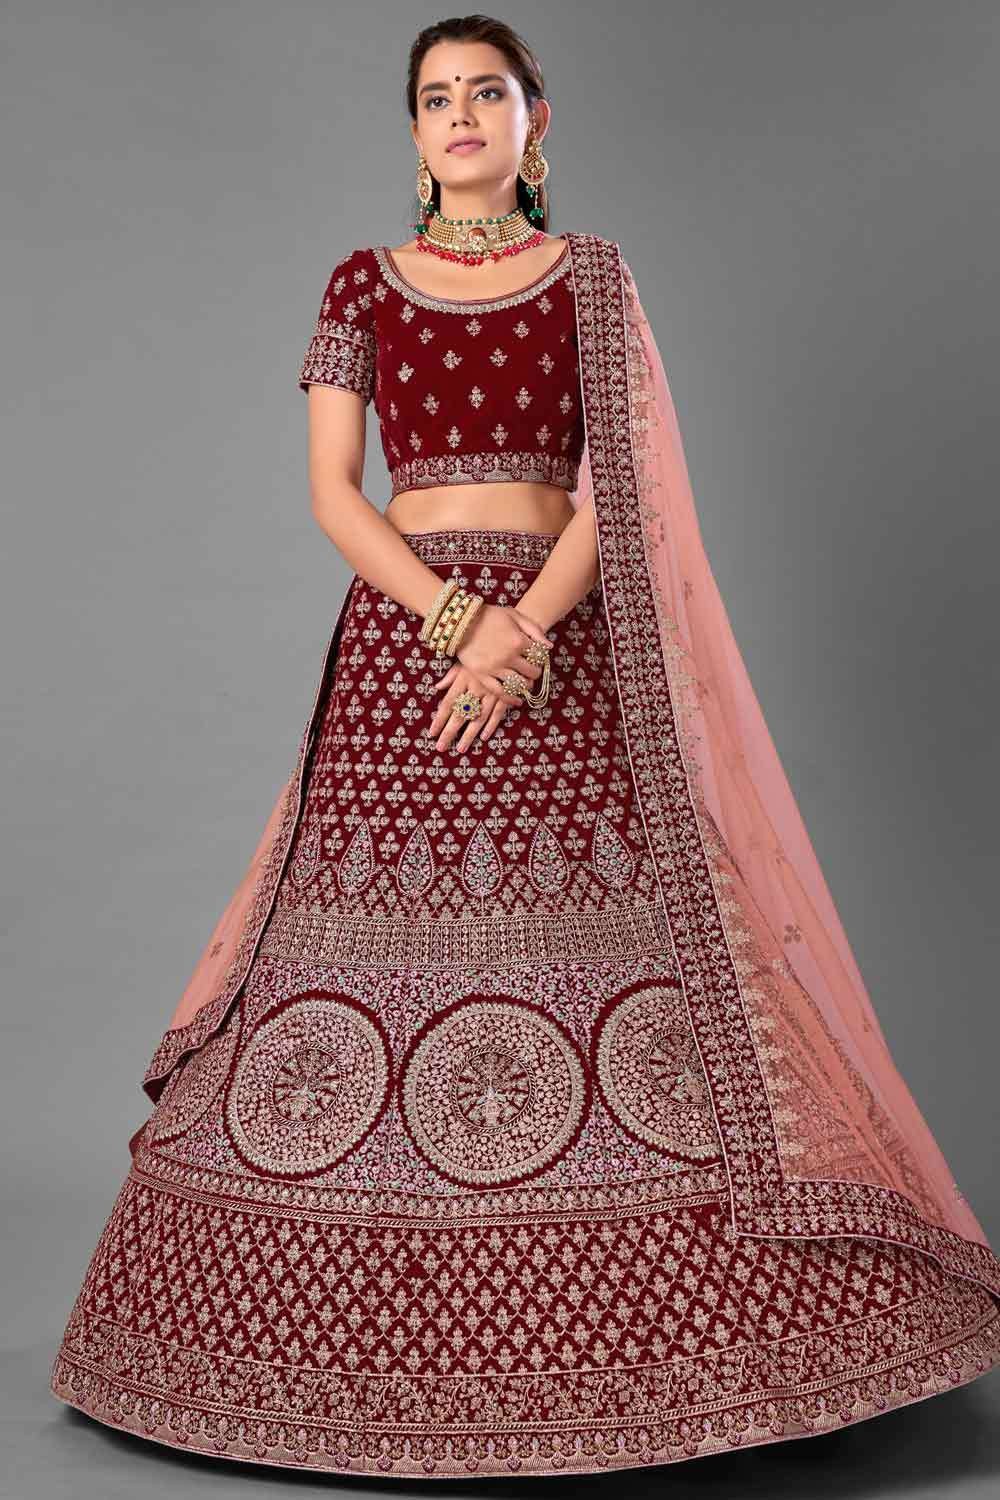 Dark maroon lehenga set features an intricately embroidered imperial motif  skirt & top, contrast embroidery dupatta